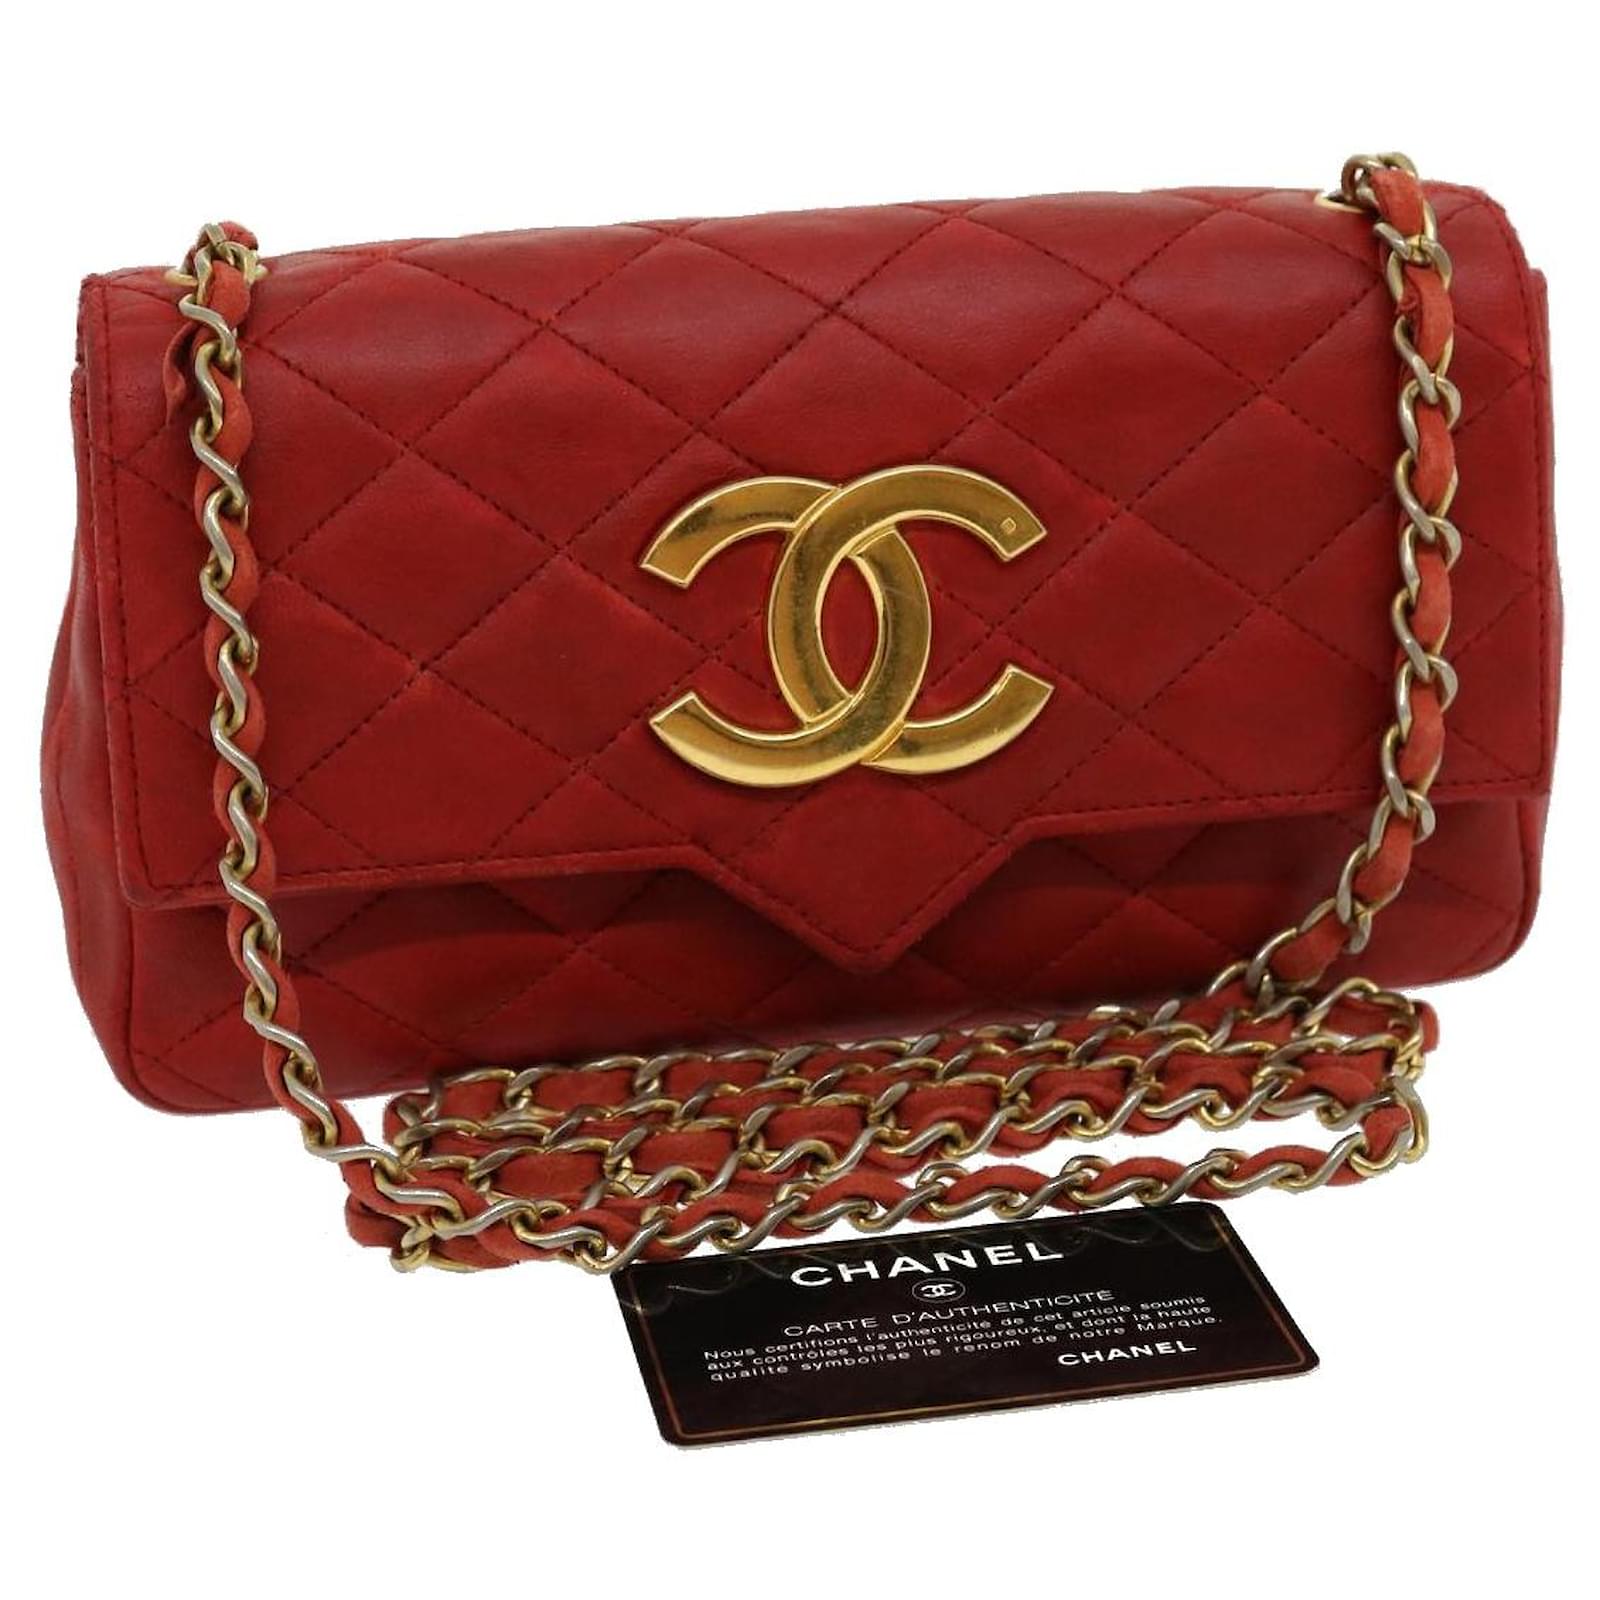 Red quilted leather and goldtone metal chain shoulder bag  Chanel  Handbags and Accessories  2020  Sothebys